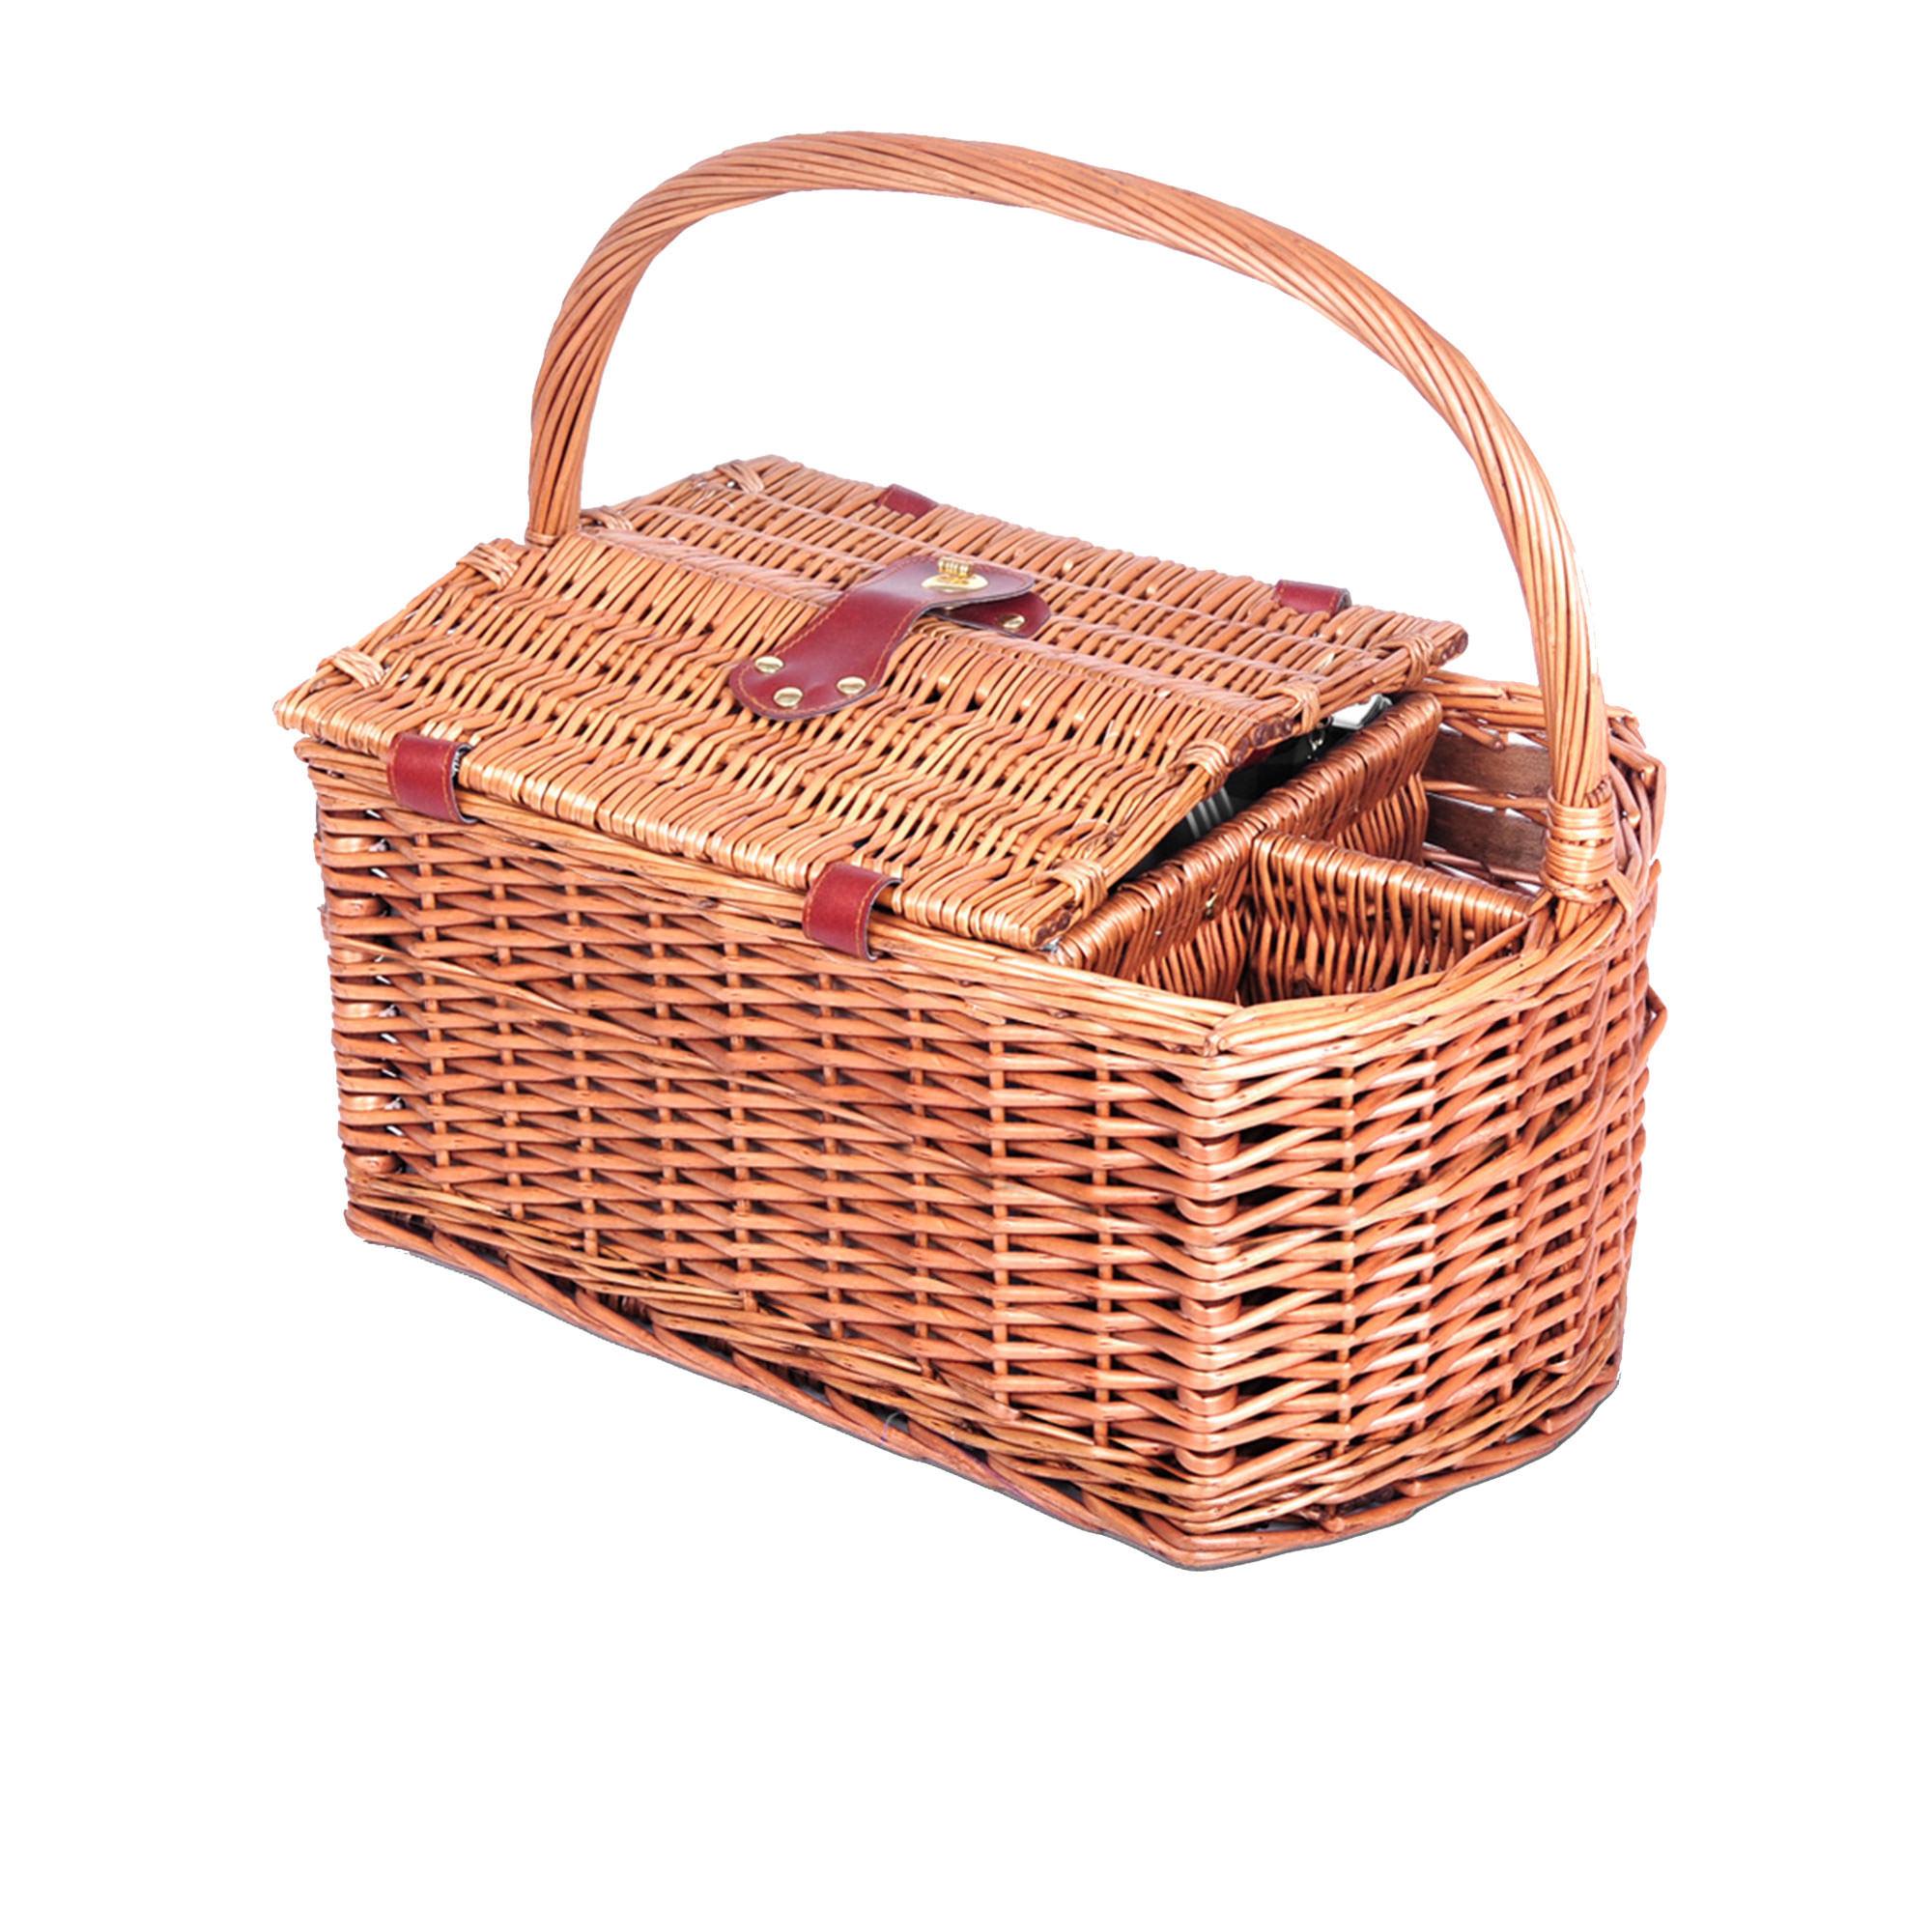 Alfresco 4 Person Deluxe Picnic Basket with Black/White Check Blanket Image 3